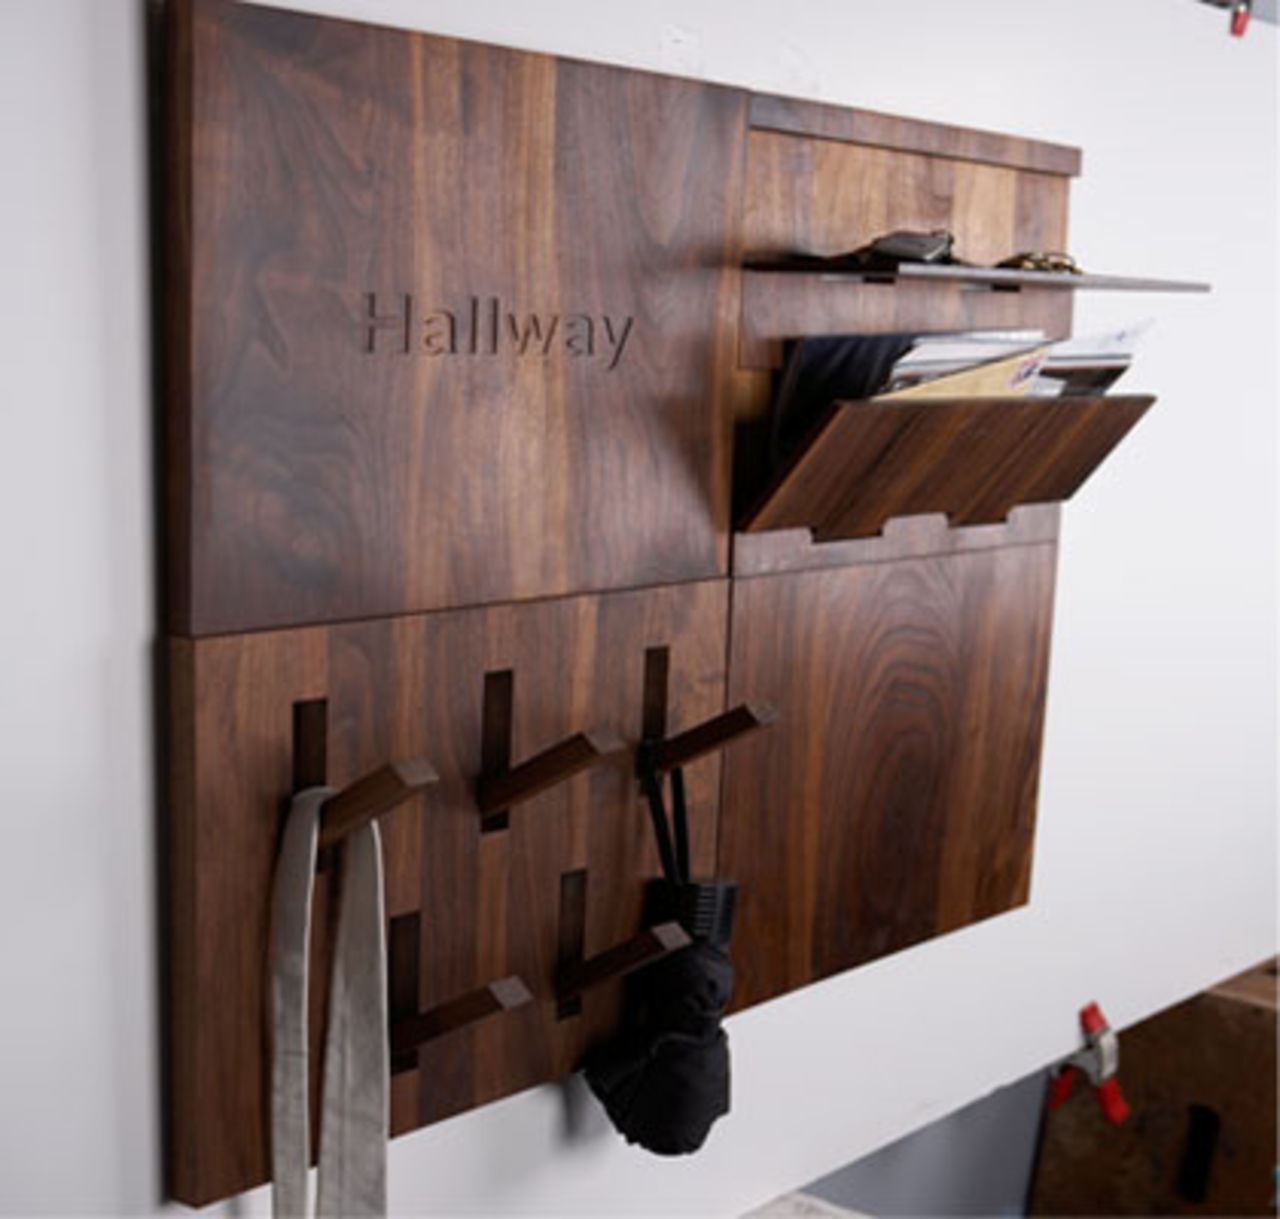 Modern and compact hallway storage solution made of wood read